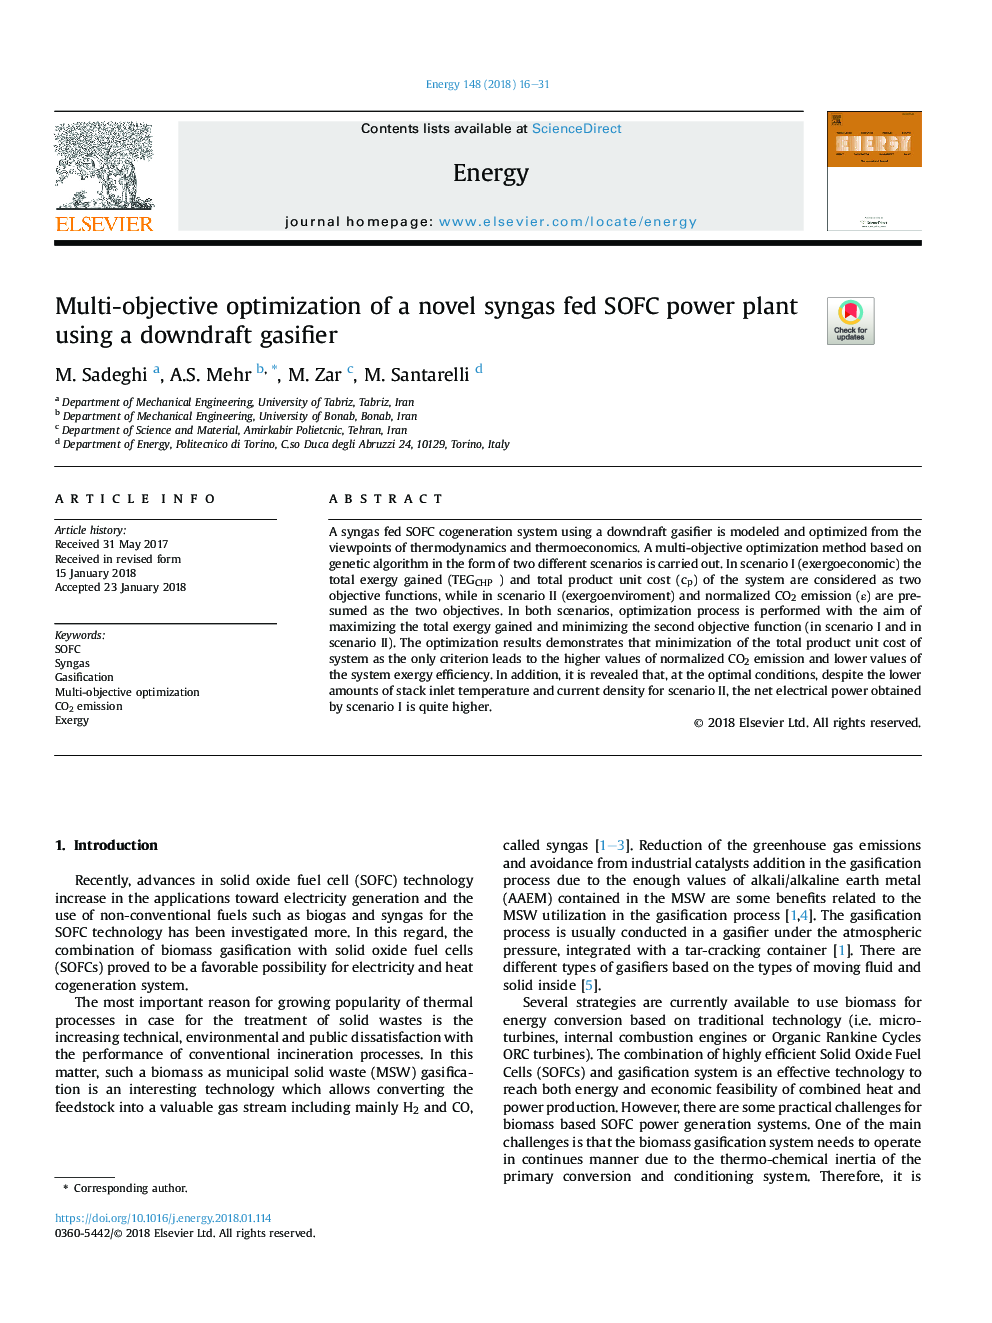 Multi-objective optimization of a novel syngas fed SOFC power plant using a downdraft gasifier